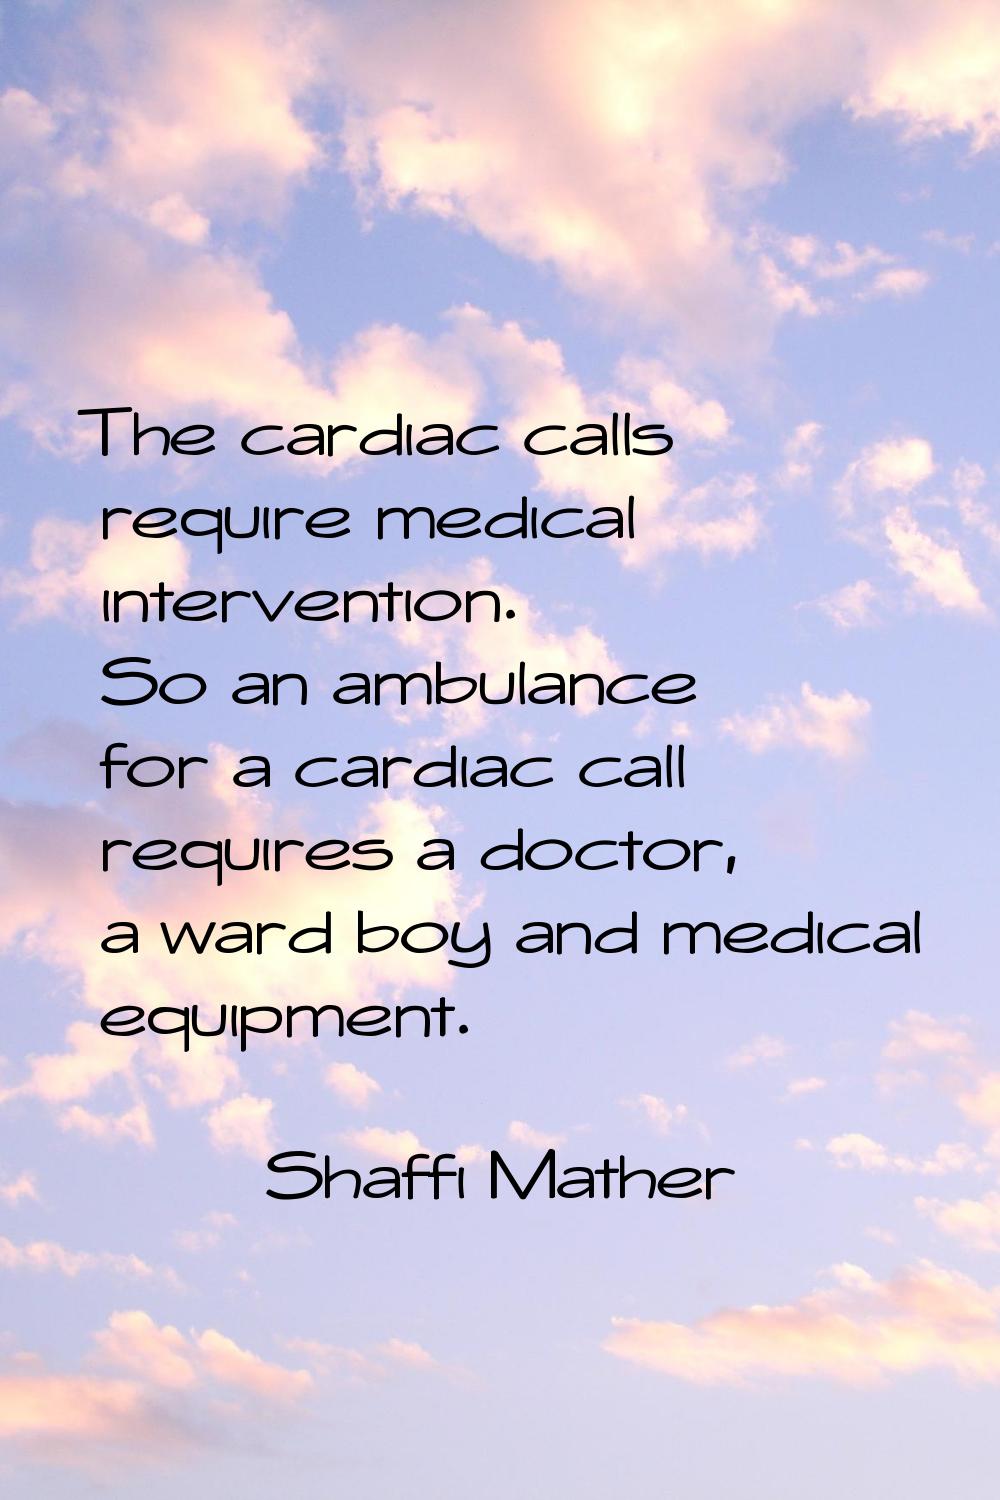 The cardiac calls require medical intervention. So an ambulance for a cardiac call requires a docto